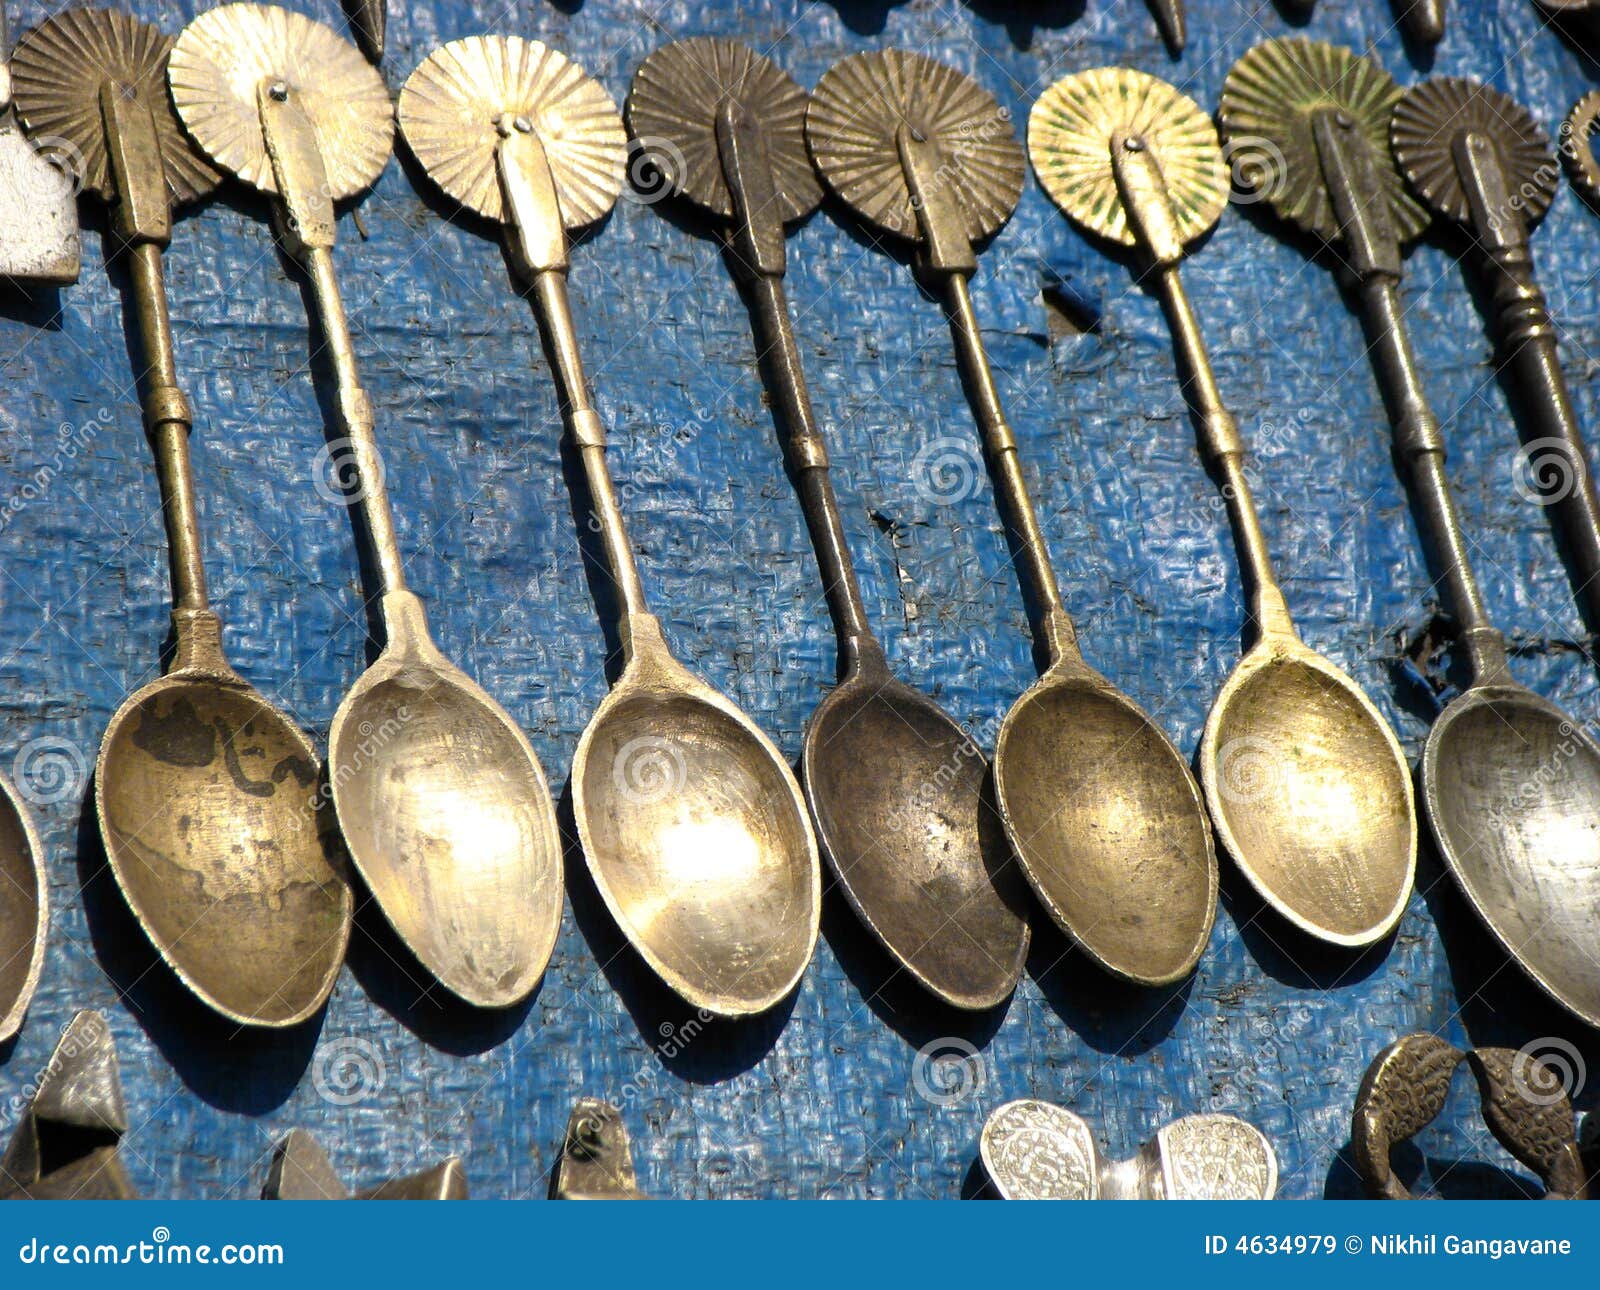 traditional spoons